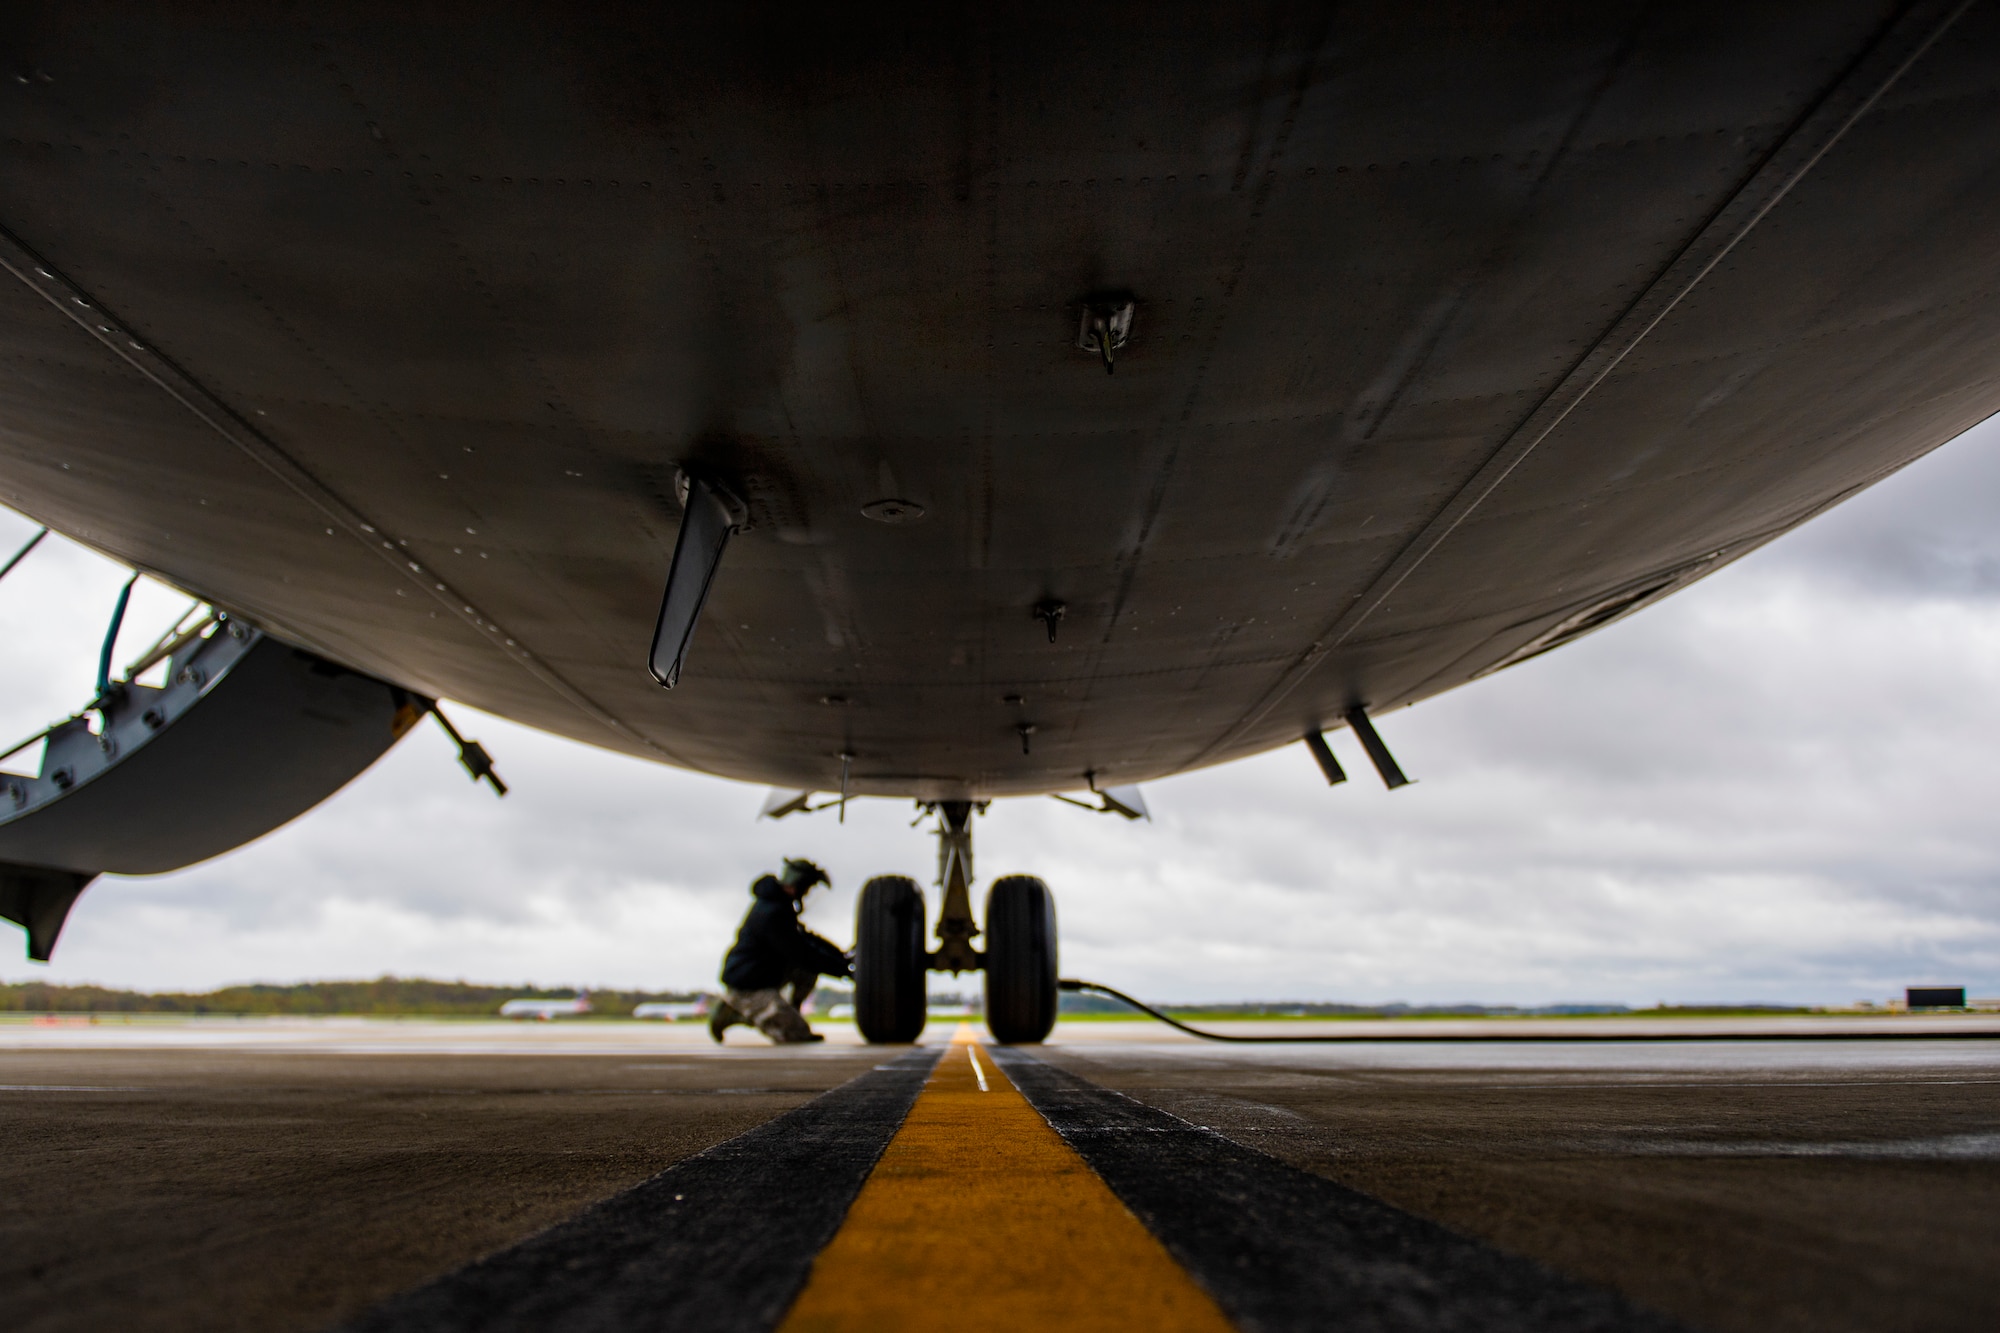 Senior Airman Zachary Anderson, 911th Aircraft Maintenance Squadron crew chief, checks the air pressure of a tire on a C-17 Globemaster III at the Pittsburgh International Airport Air Reserve Station, Pennsylvania, May 6, 2020.